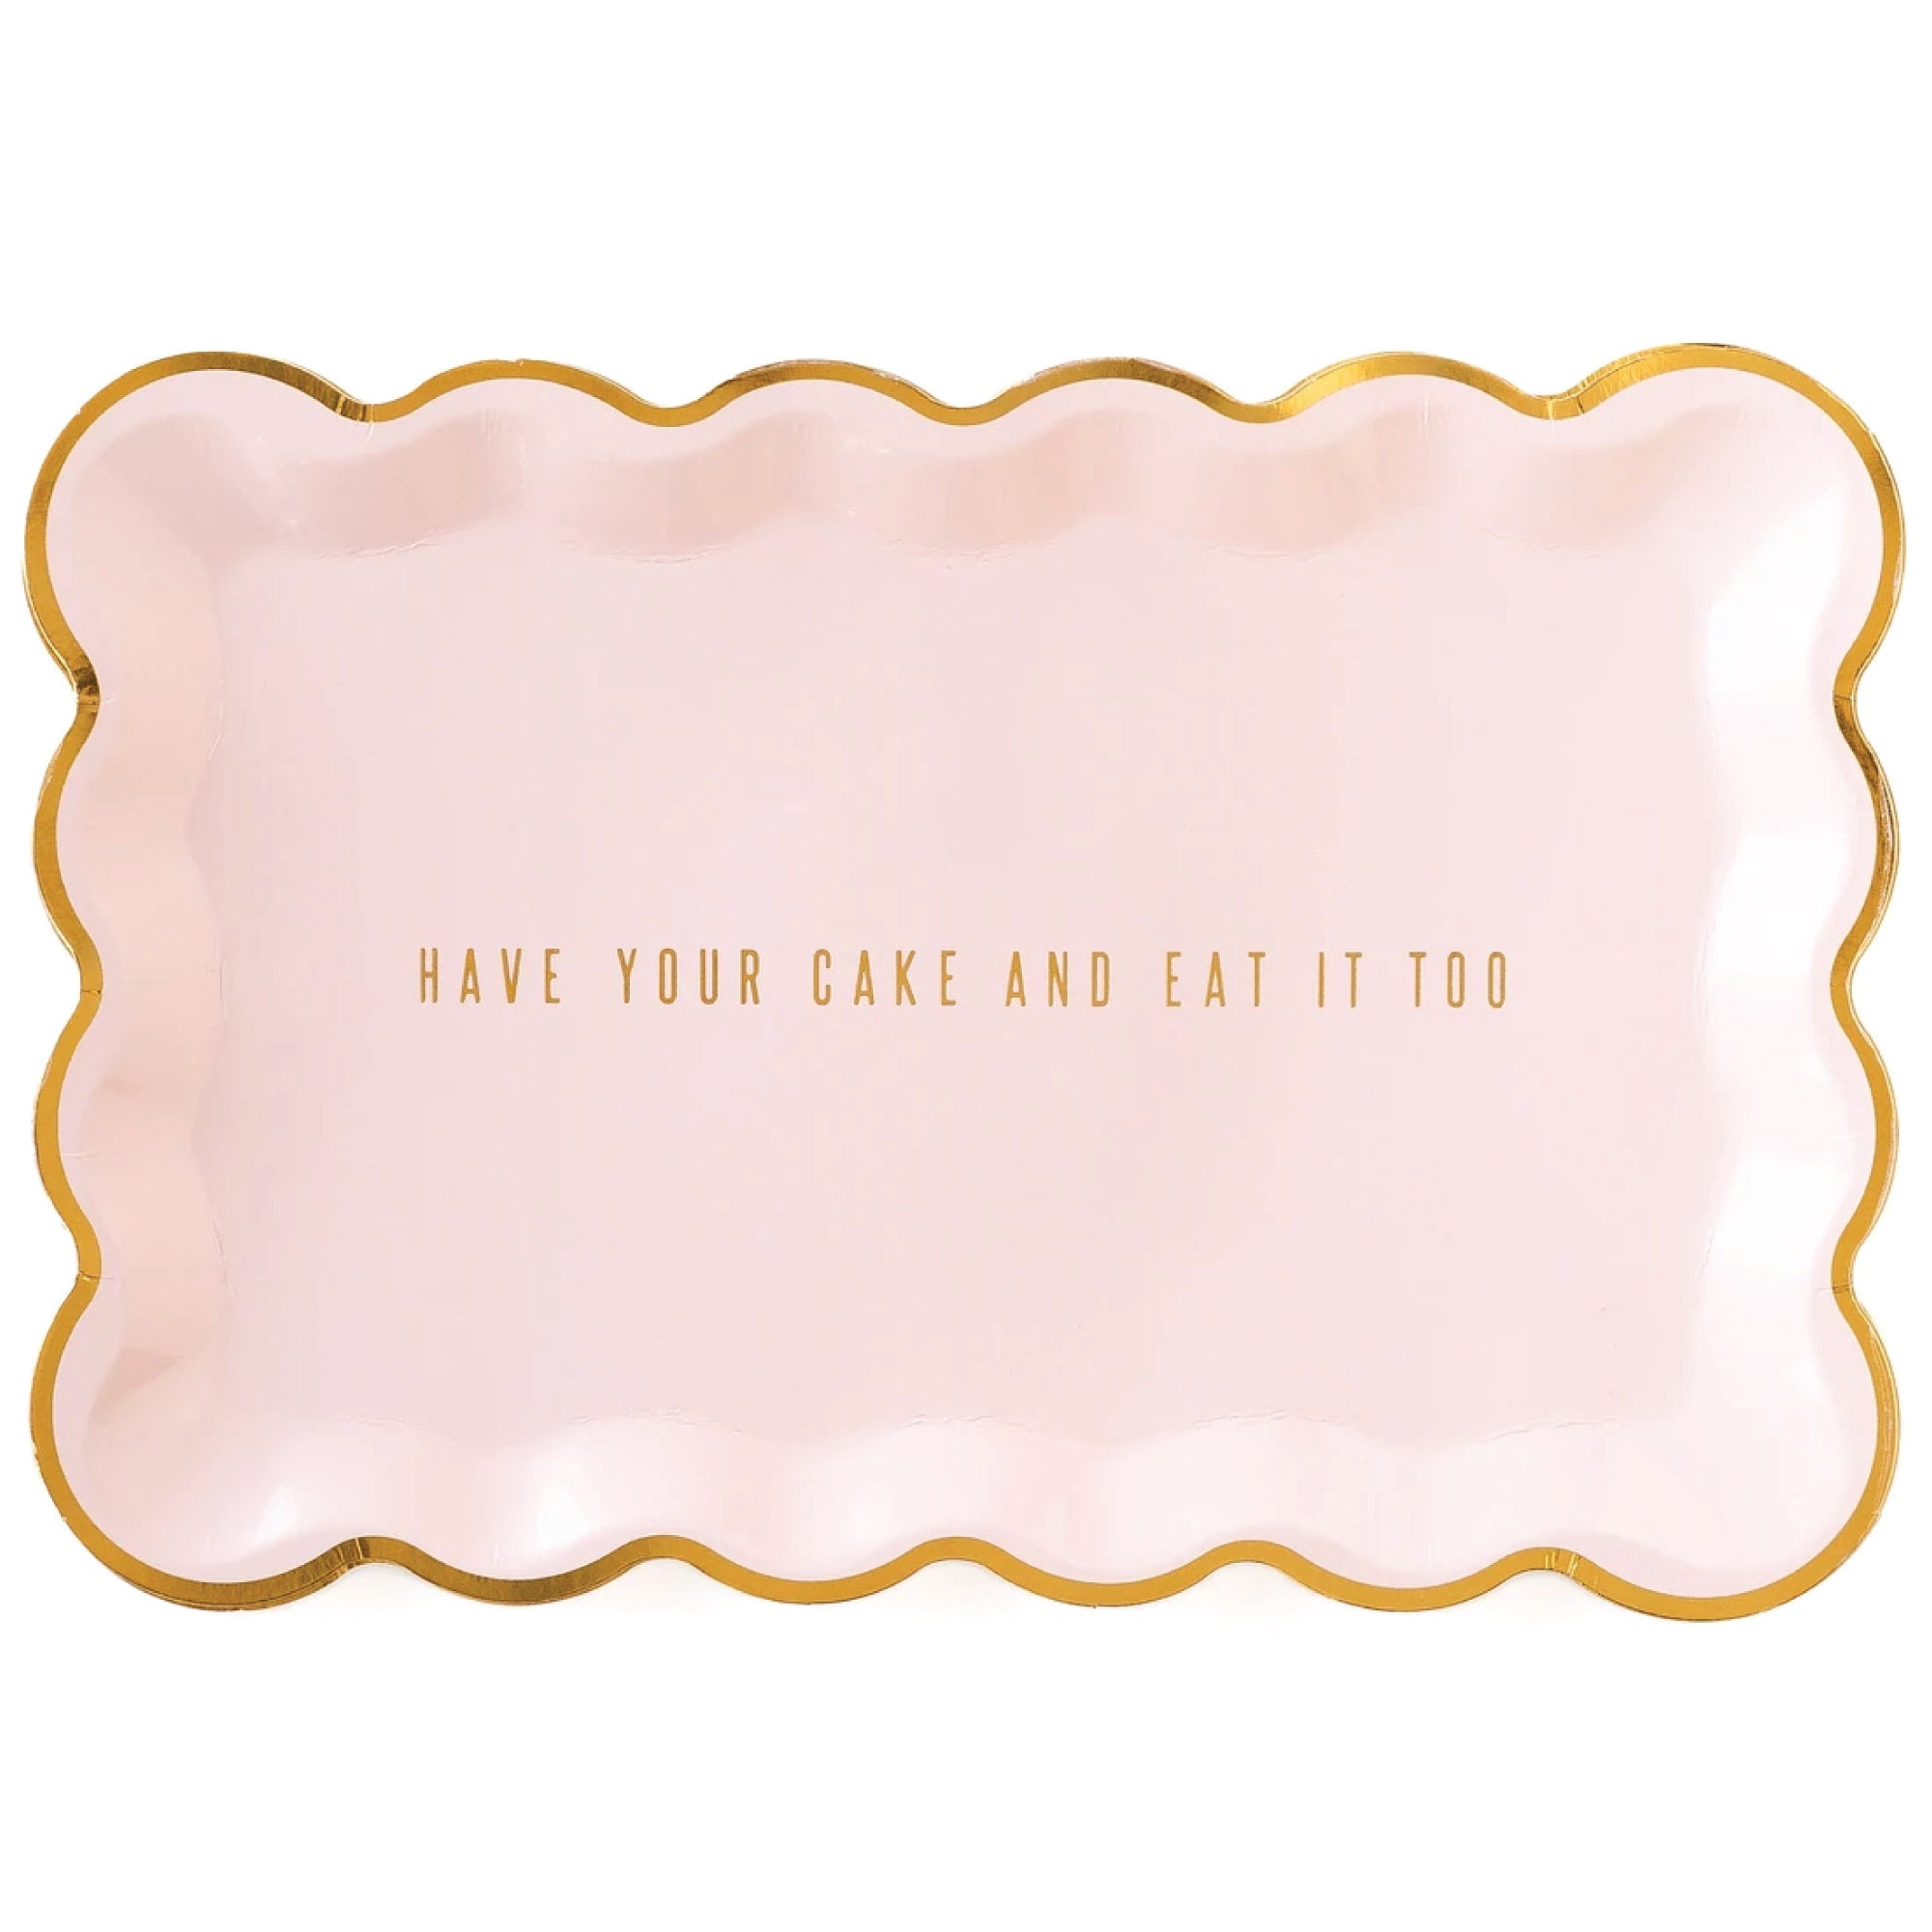 Girl Baby Shower Valentine Day Party Have Your Cake & Eat It Two Birthday Plates Pink Bridal Shower Blush Pink Rectangle Plates 8ct